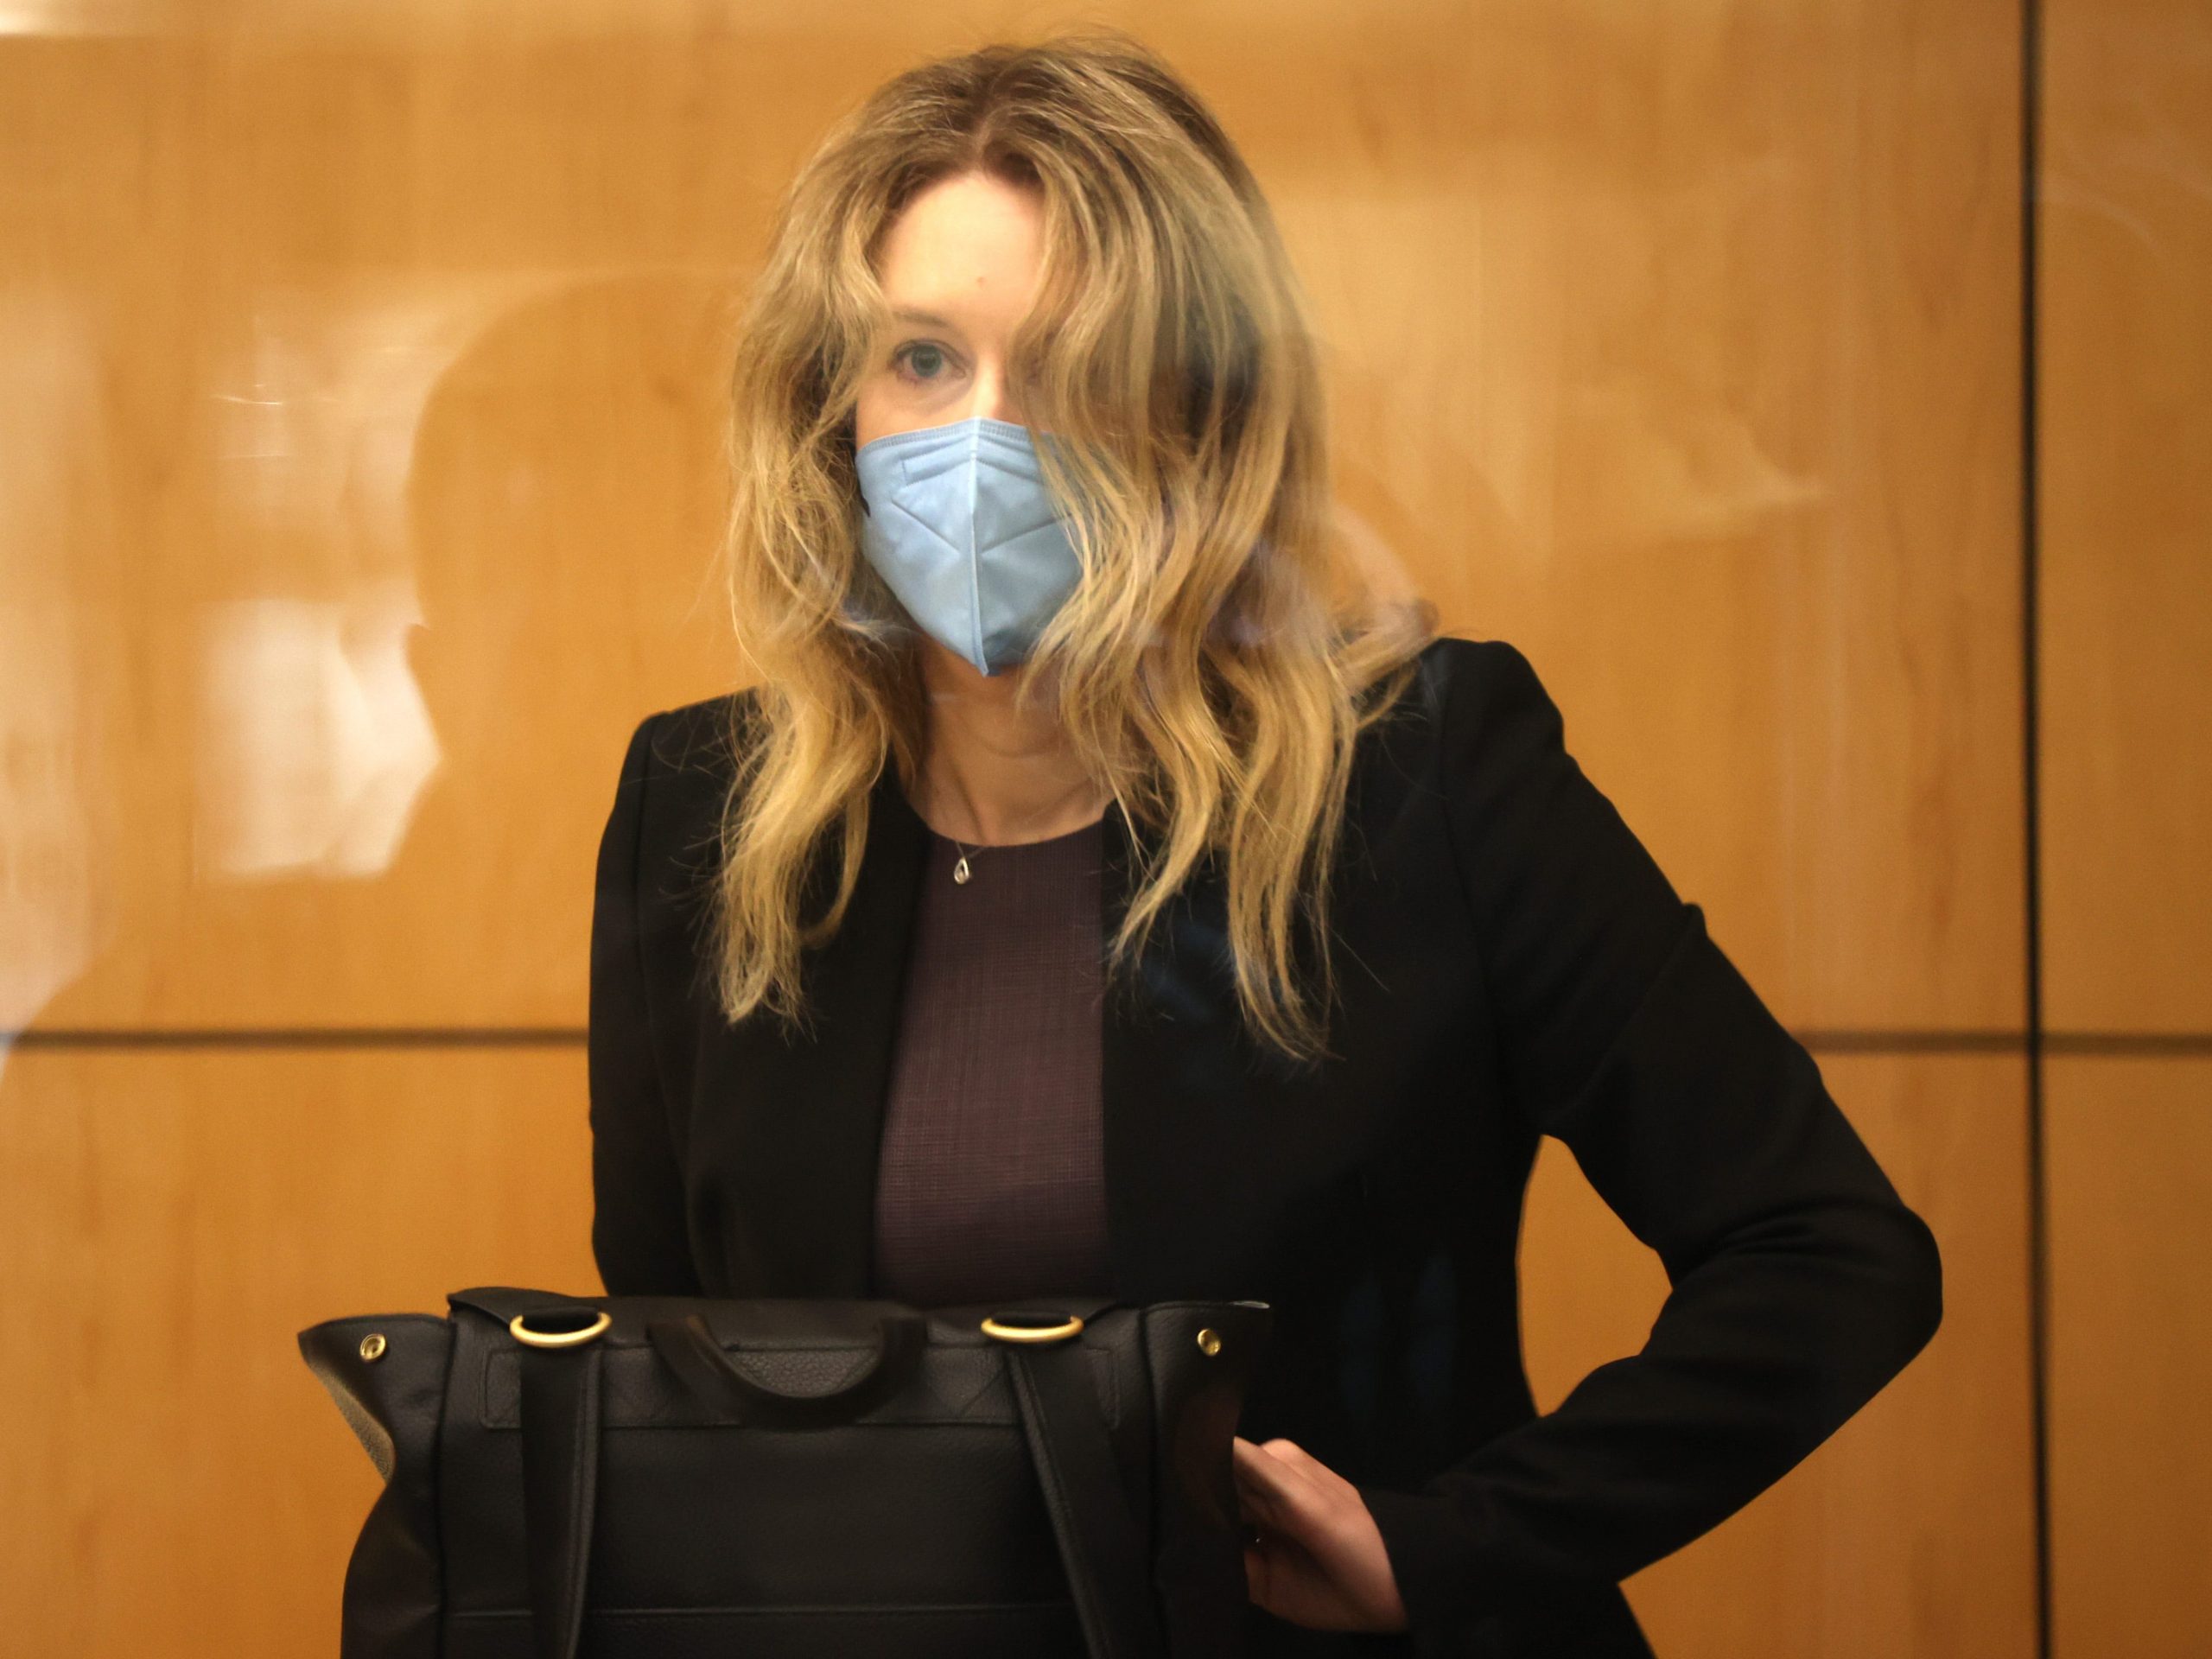 Theranos founder Elizabeth Holmes in a black suit jacket in a San Jose courtroom